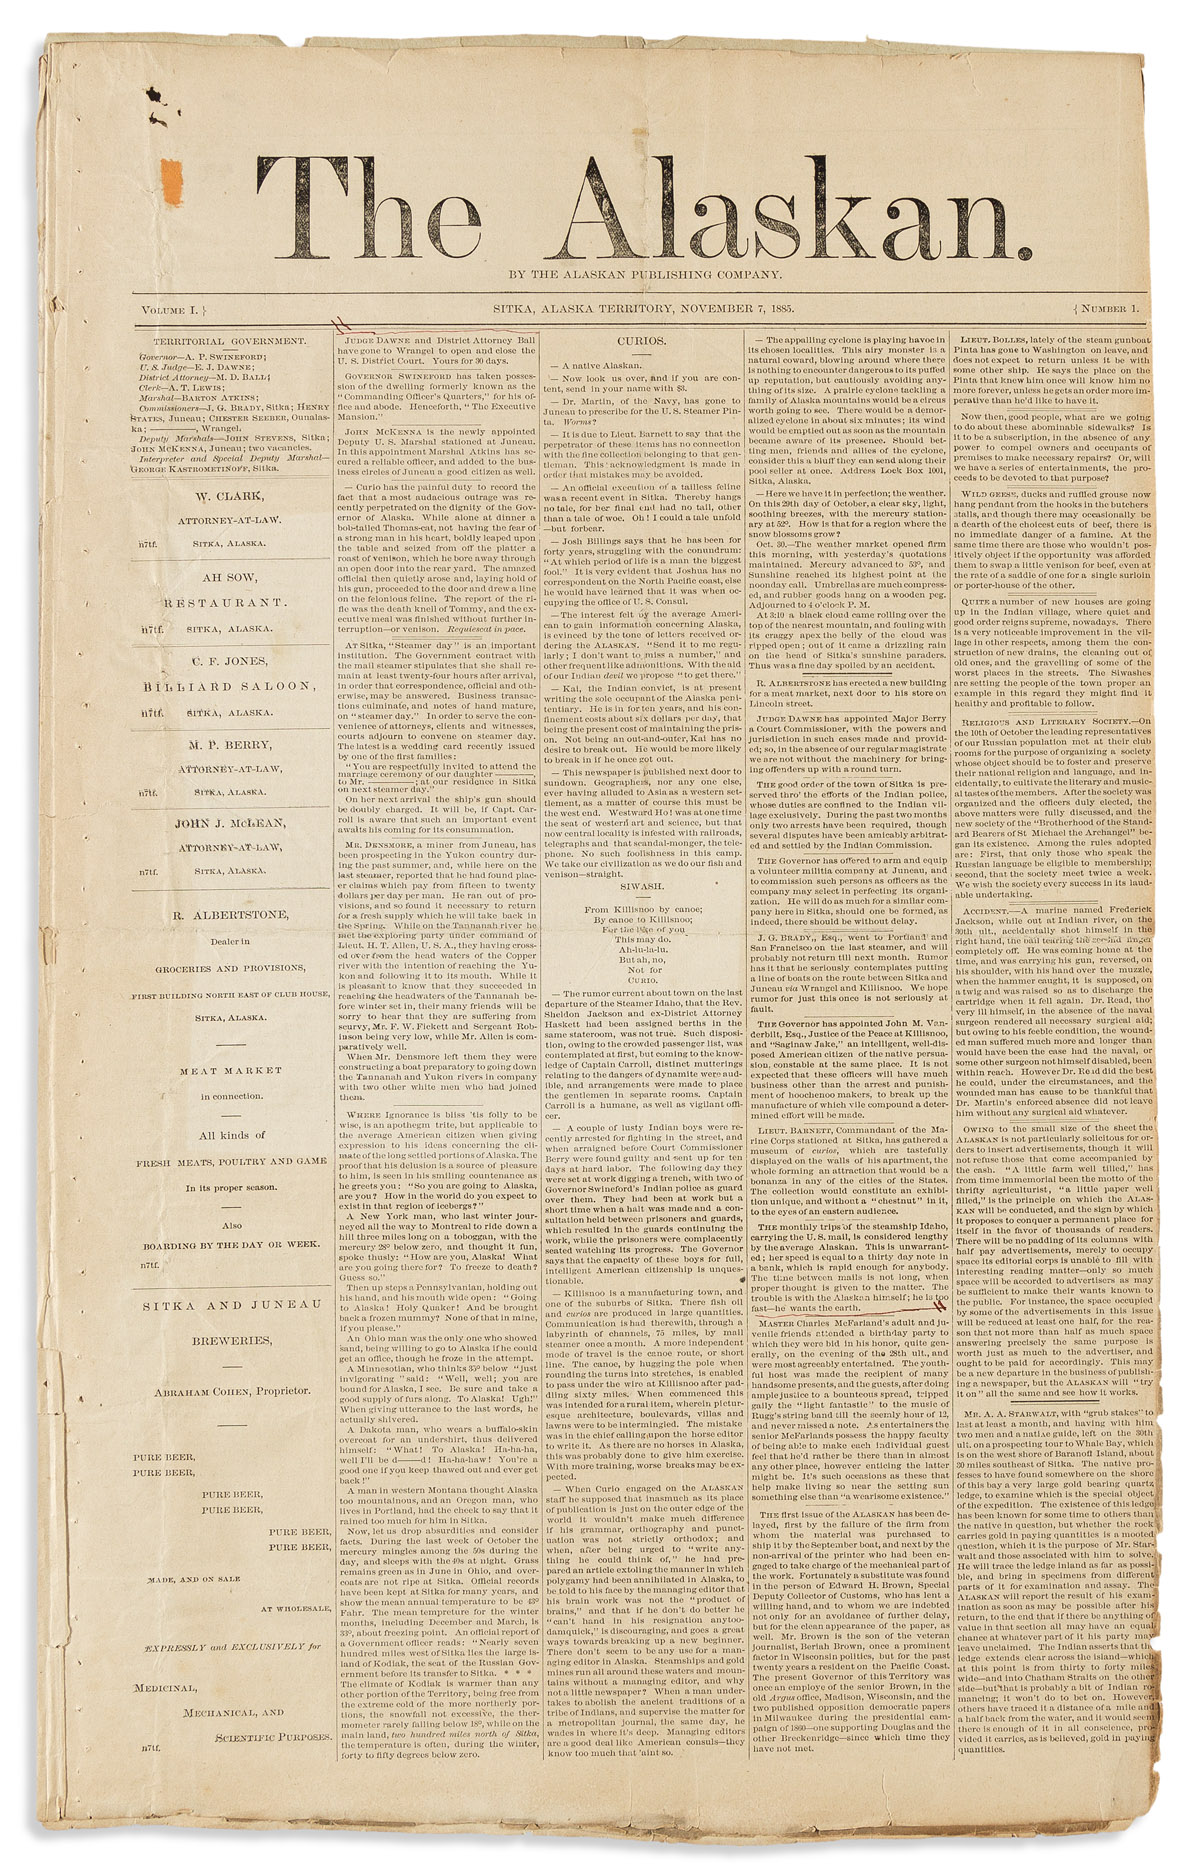 (ALASKA.) Three early issues of the weekly newspaper The Alaskan, including the first issue.